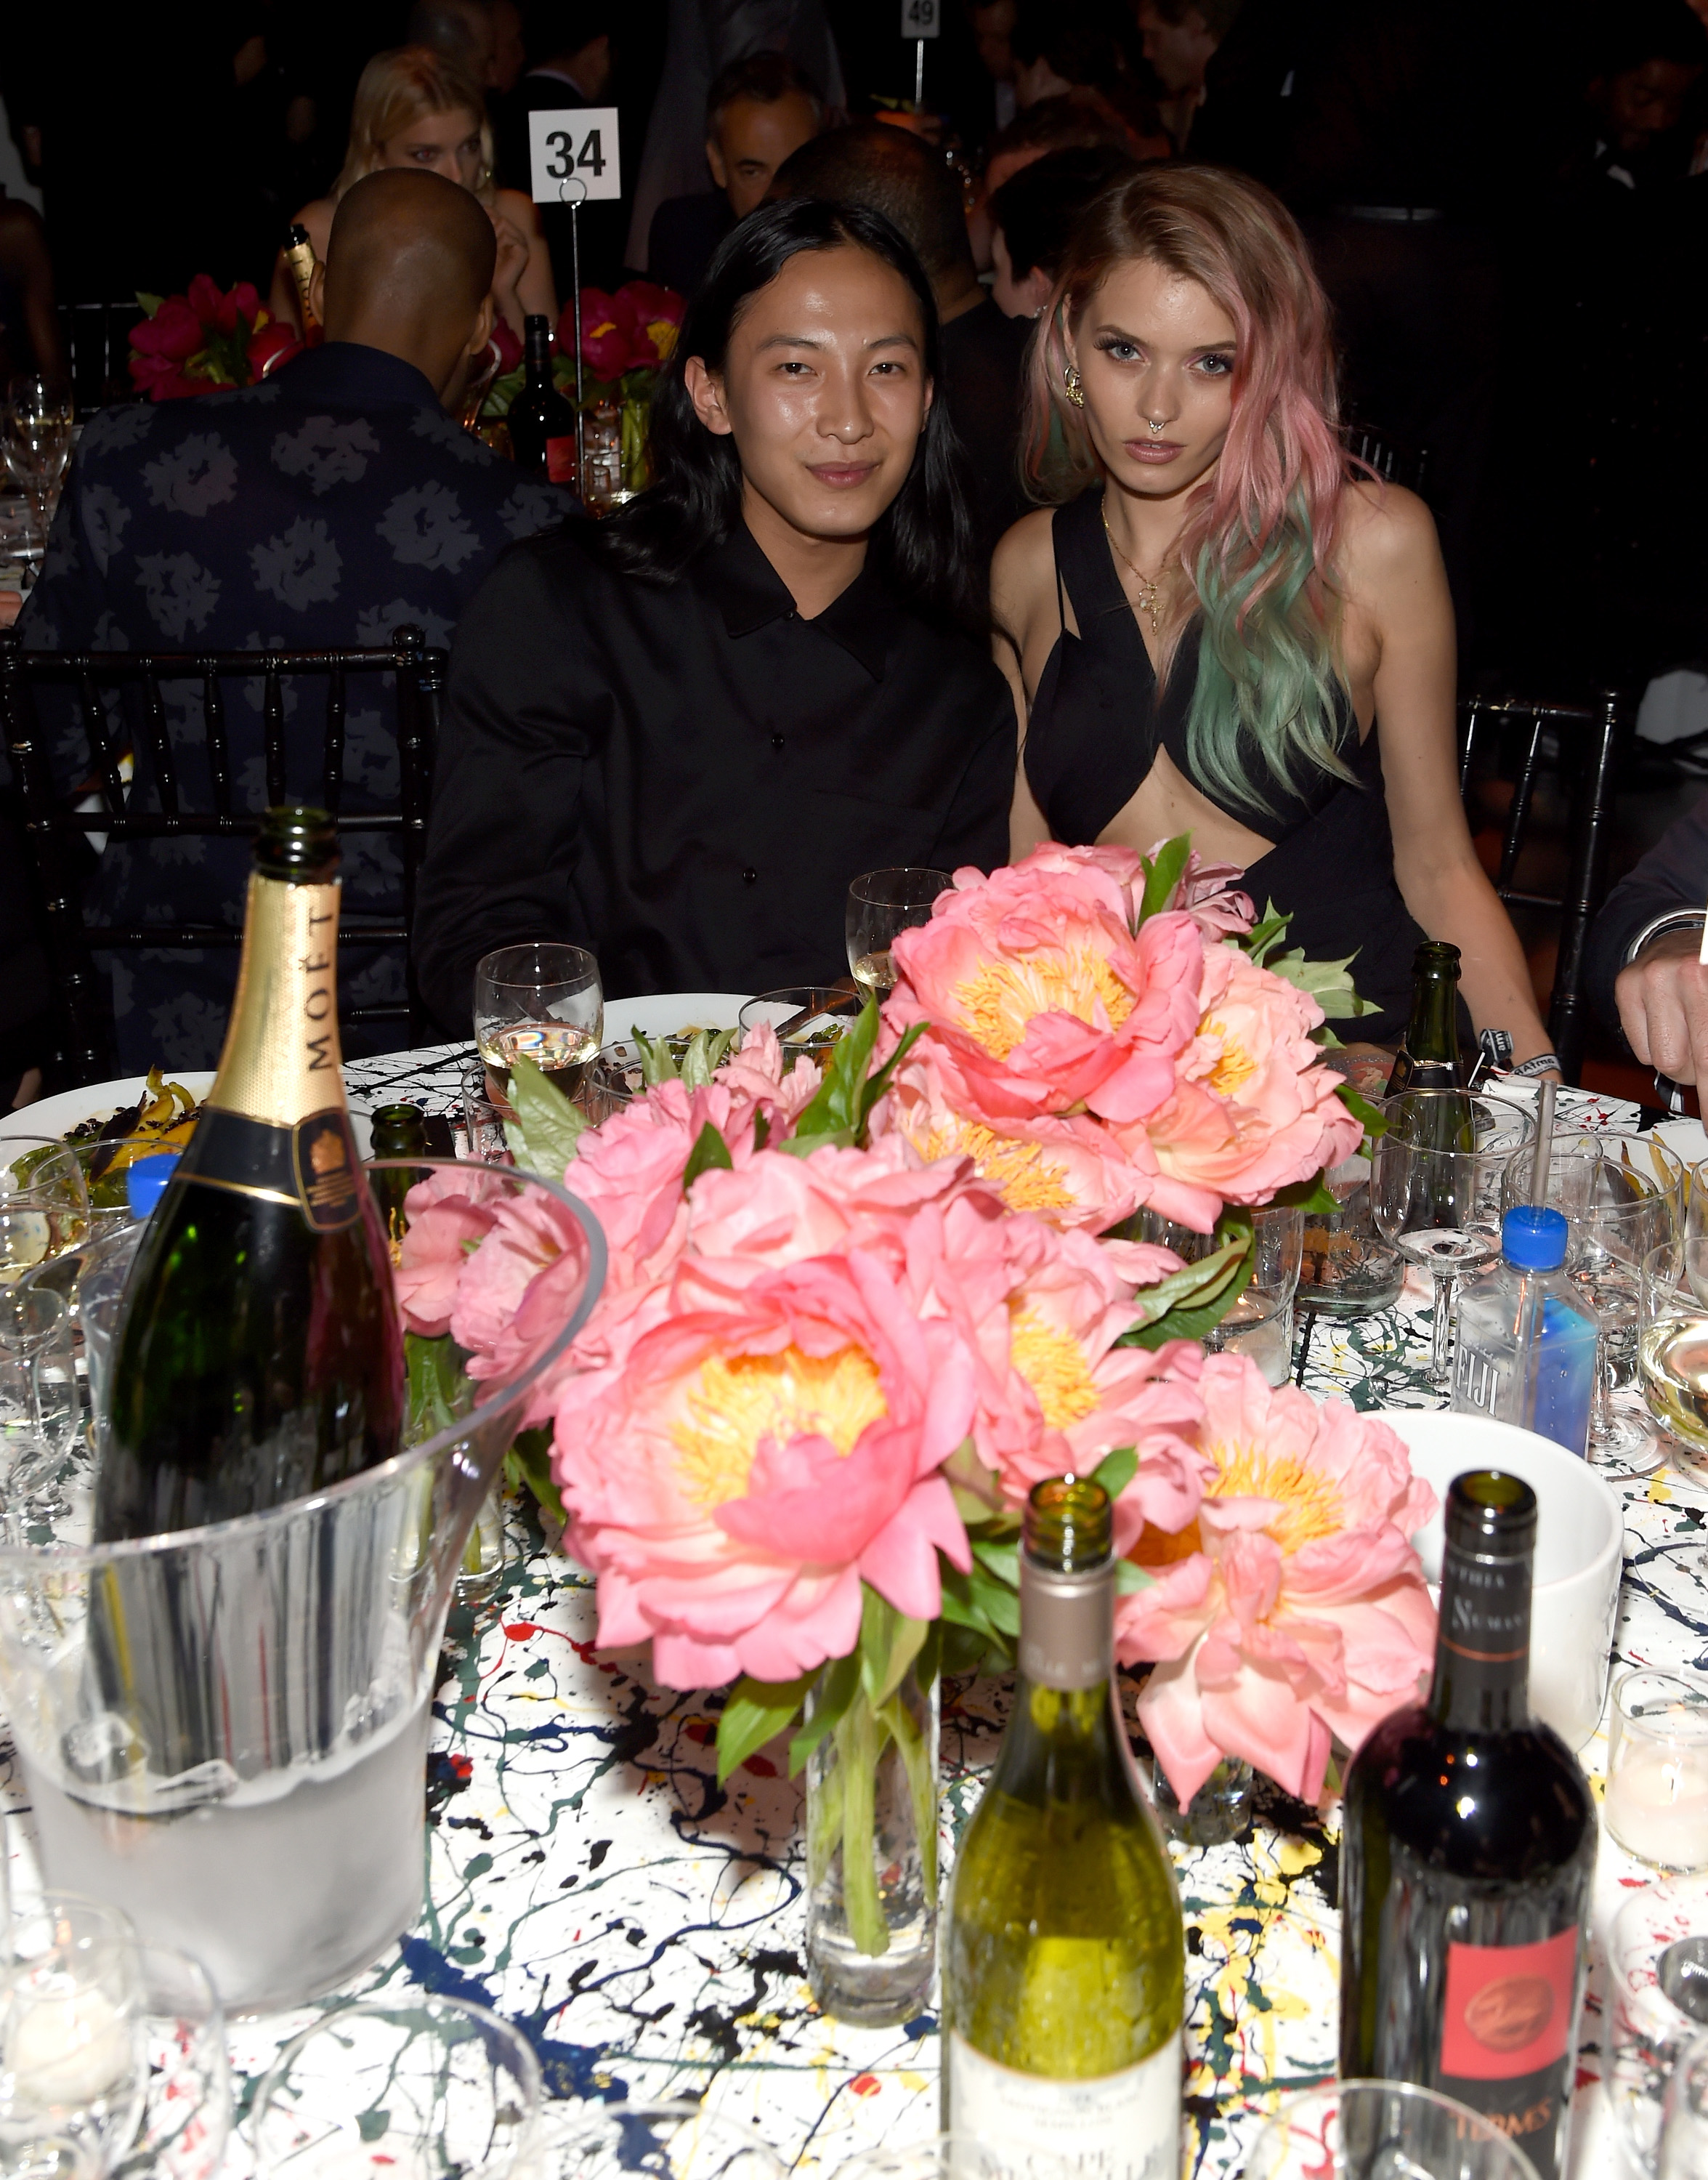 NEW YORK, NY - JUNE 16:  Alexander Wang and Abbey Lee Kershaw attend Moet & Chandon Toasts to the amfAR Inspiration Gala at Spring Studios on June 16, 2015 in New York City.  (Photo by Jamie McCarthy/Getty Images for Moet & Chandon)